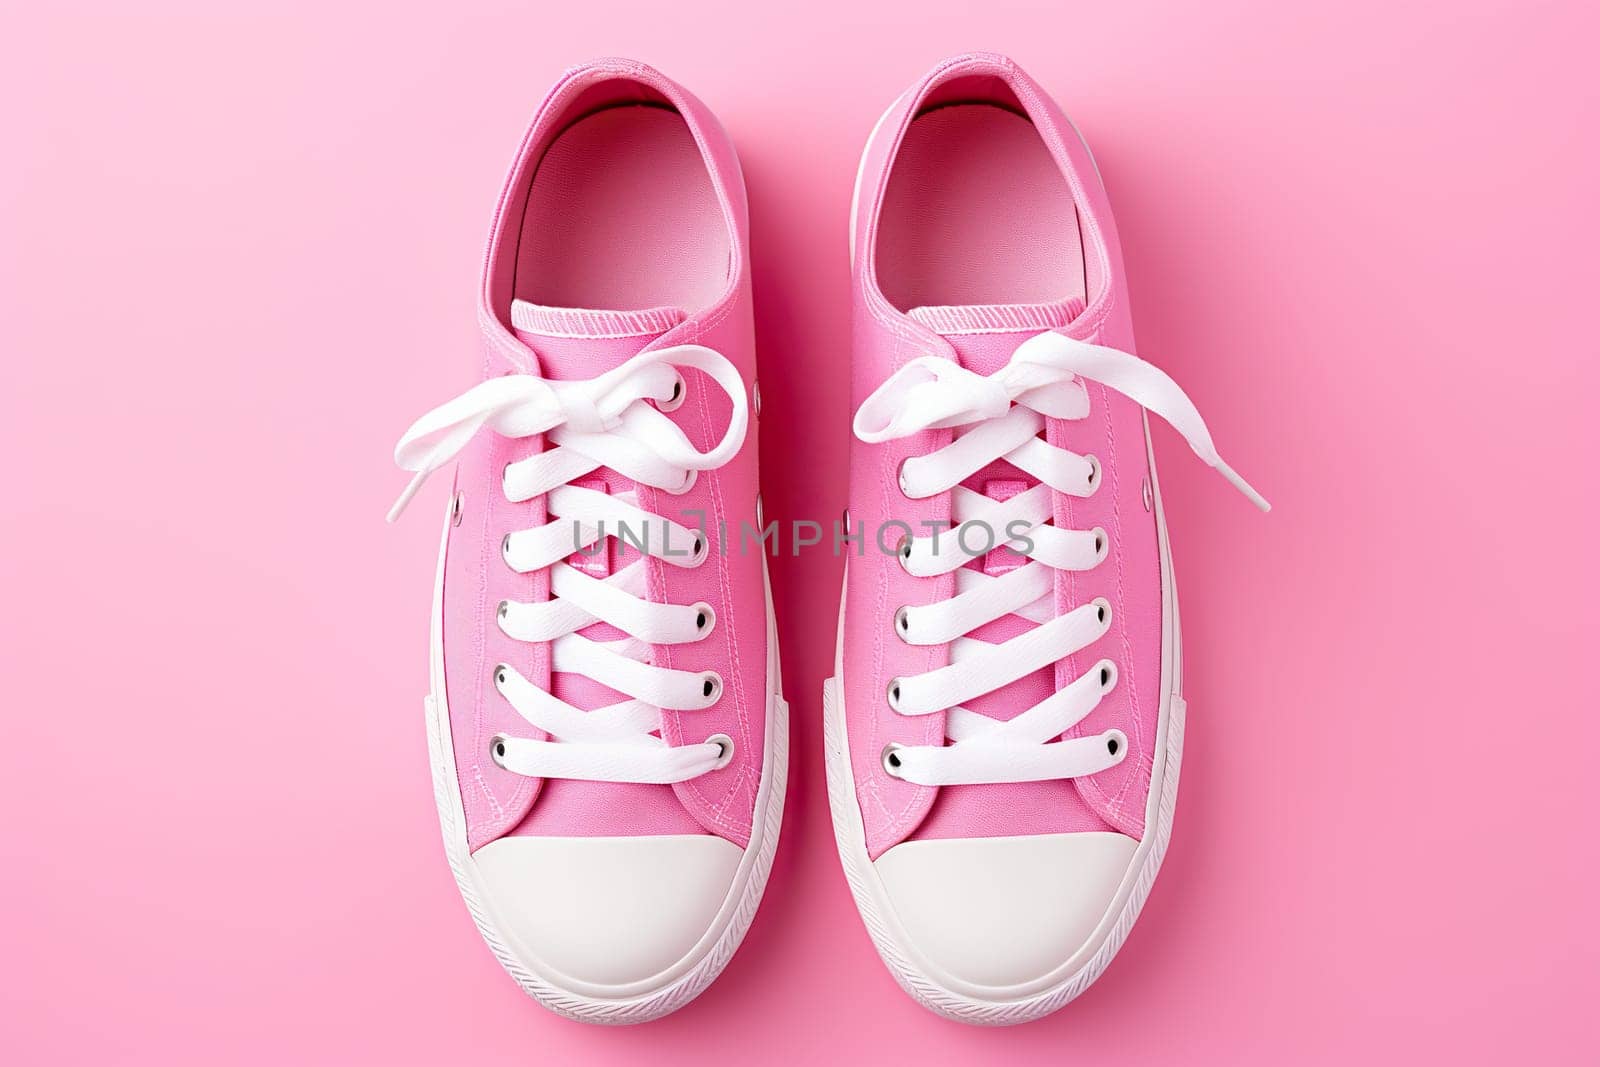 New pair of pink woman sneakers on pink background. Lifestyle, sneaker sport shoe. Top view by Vovmar